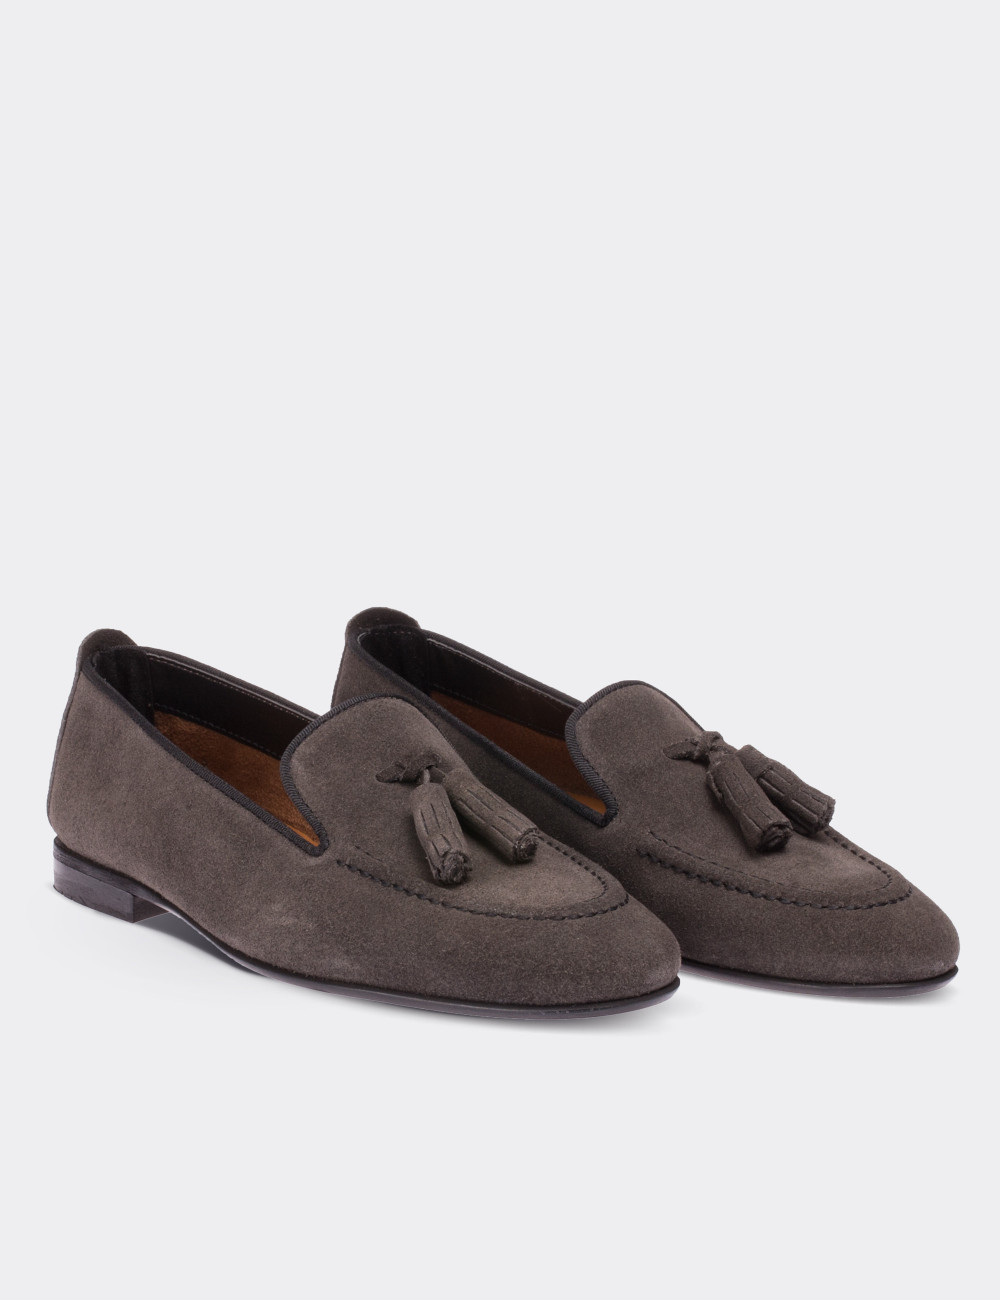 Brown Suede Leather Loafers - 01619ZKHVM01